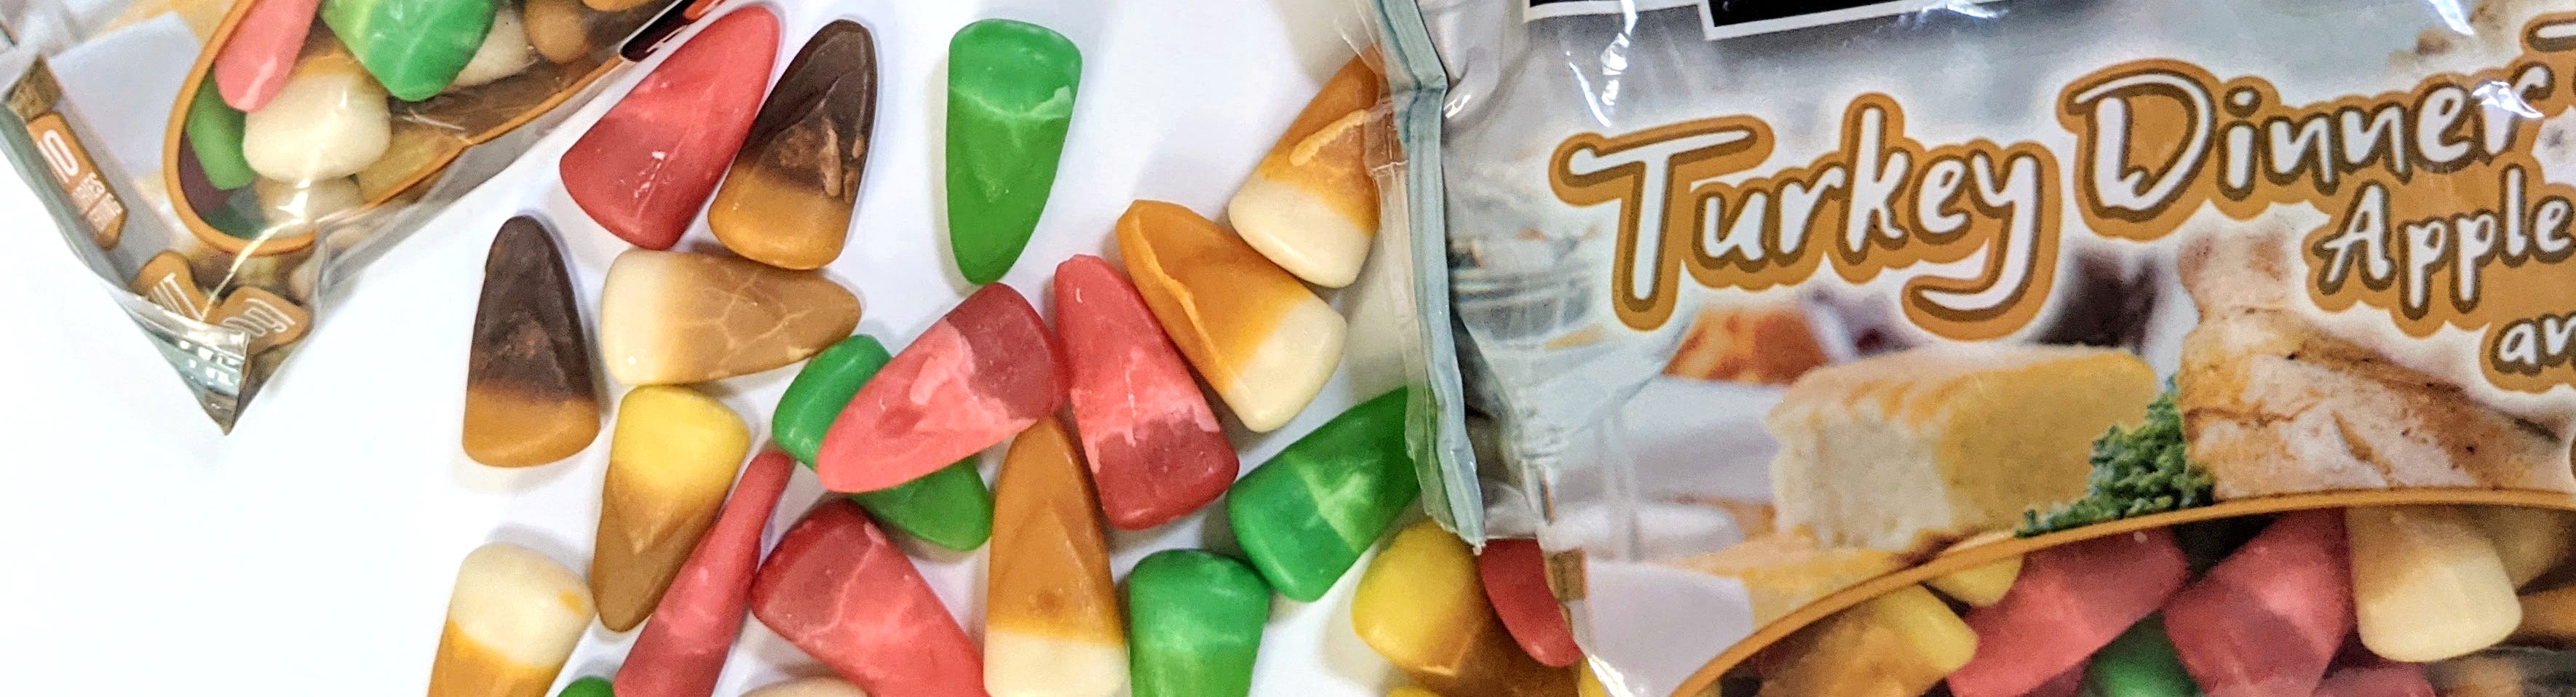 Review: I Tried The Turkey Dinner Candy Corn